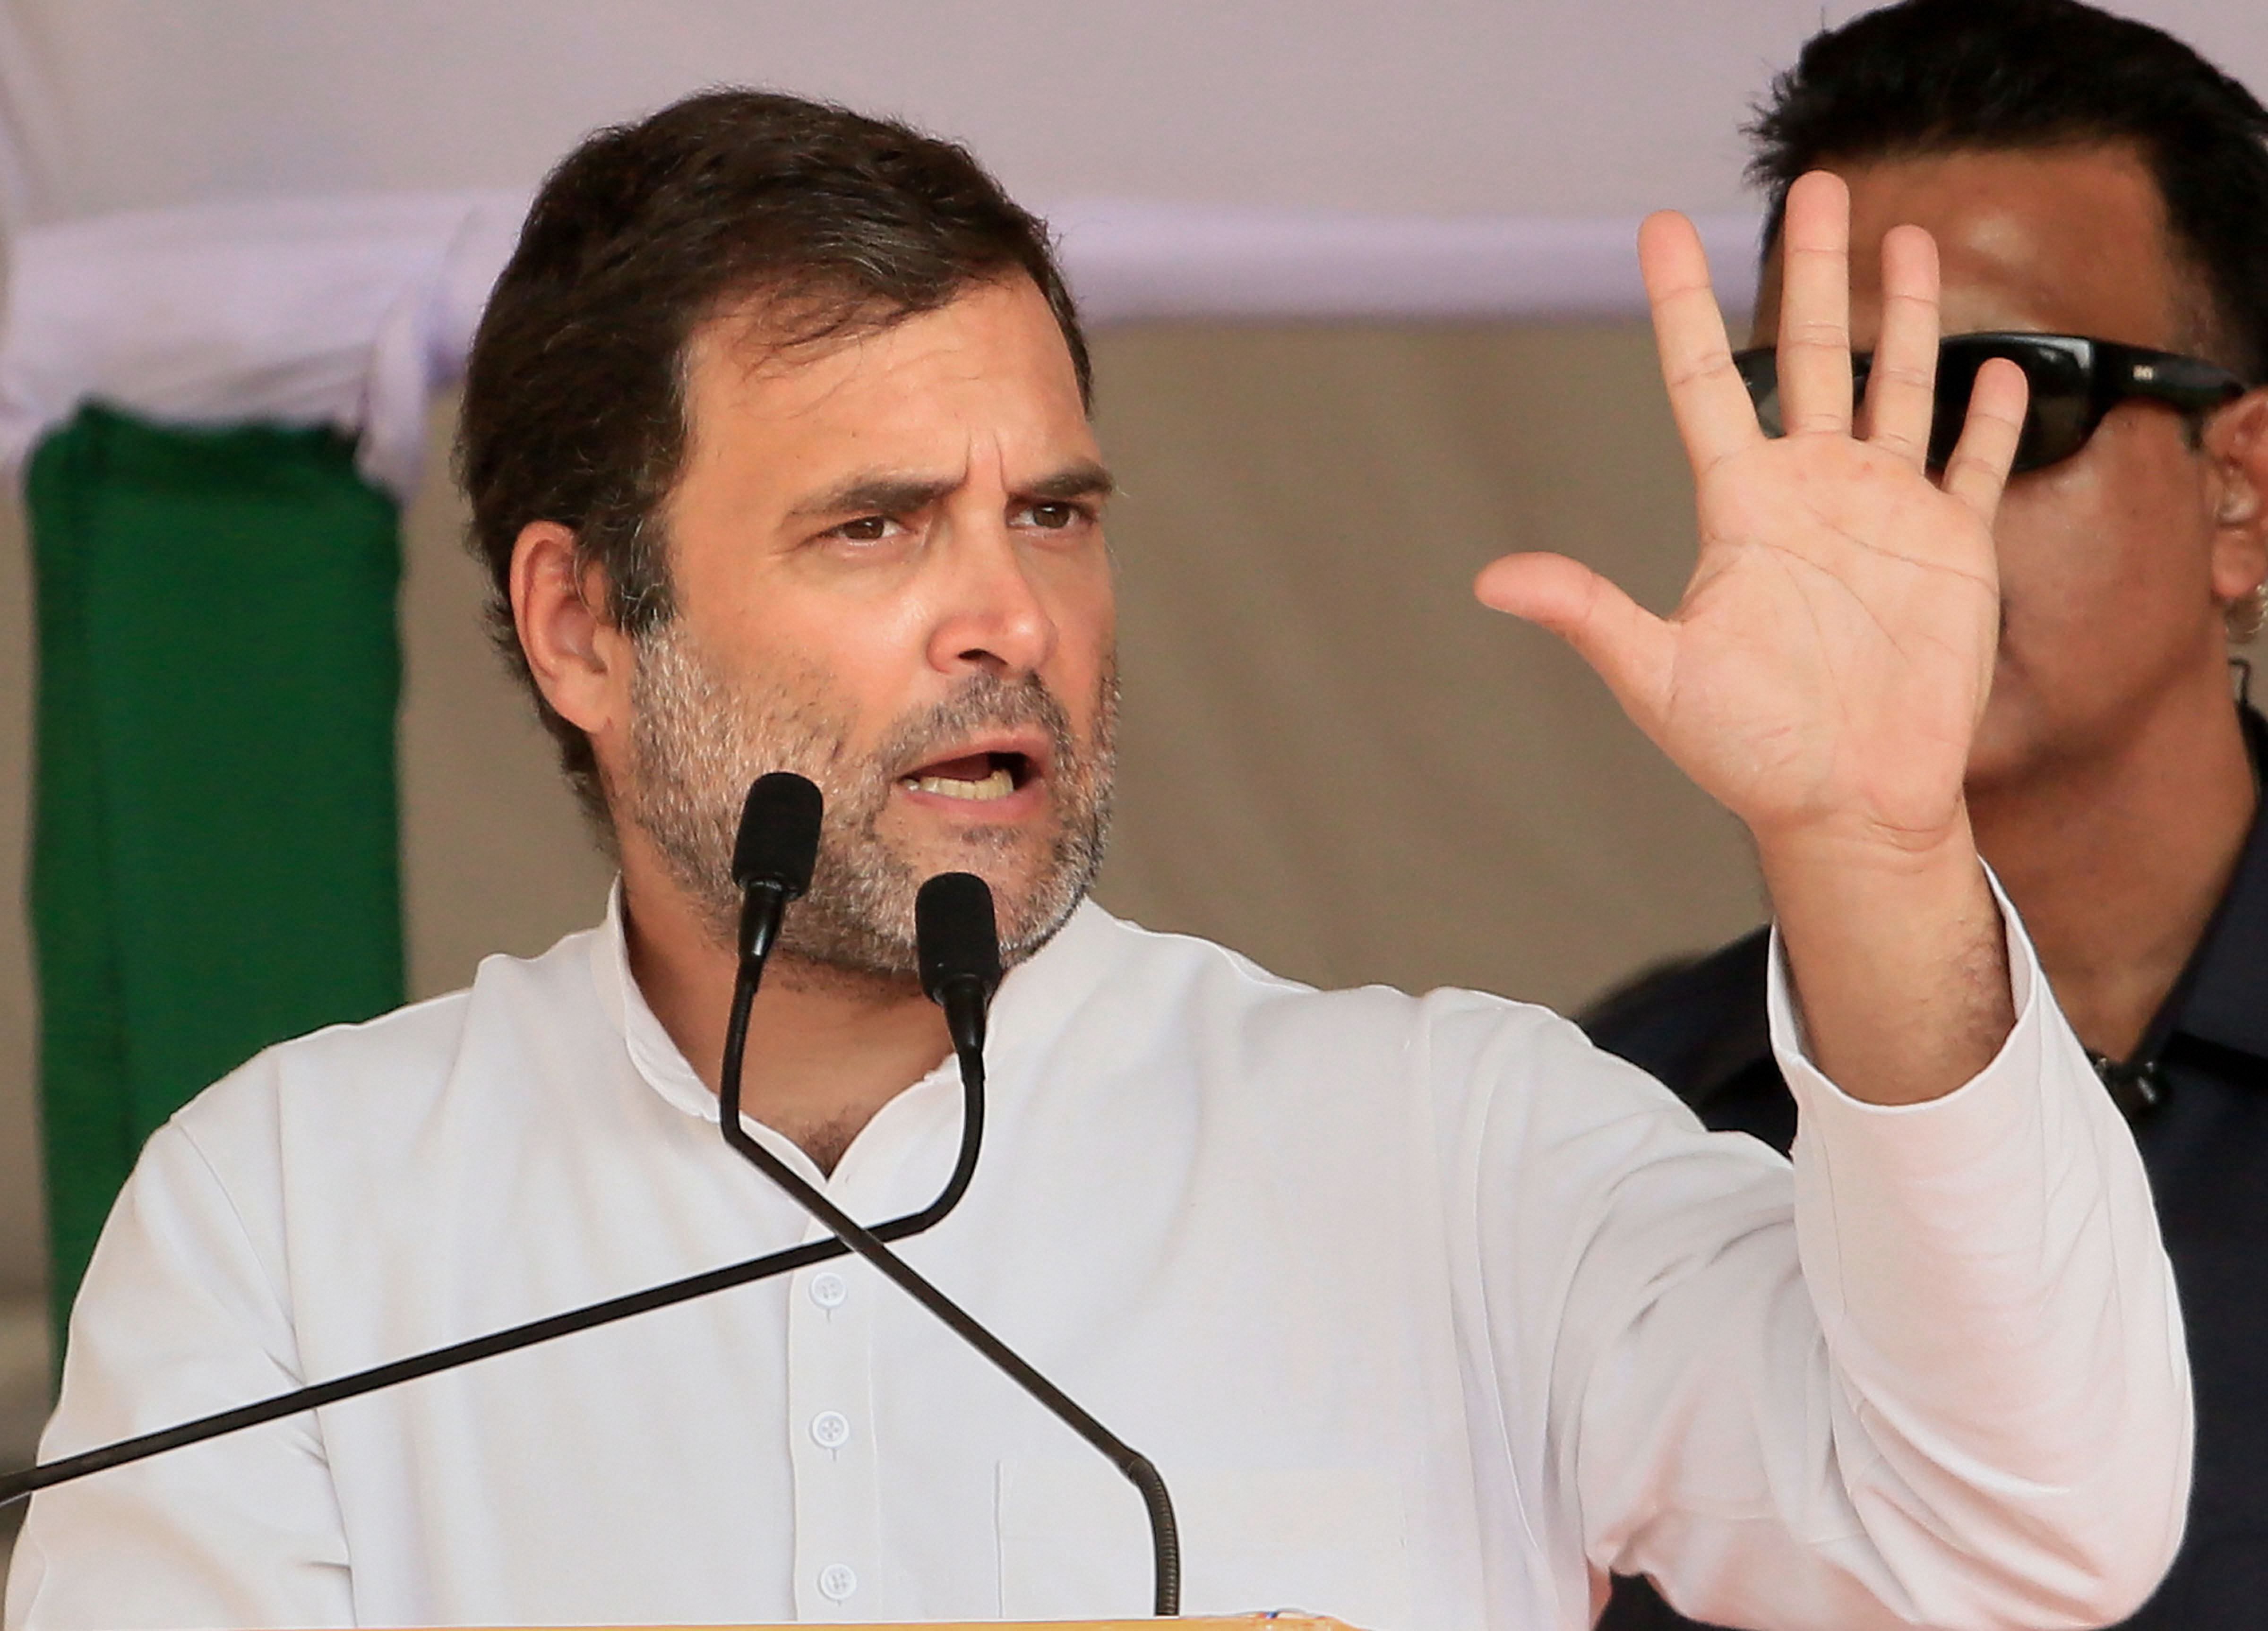 Congress leader Rahul Gandhi gestures as he speaks during an election campaign rally in support of party candidate Bhushan Bara (Simdega) and Vikshal Kongari (Kolebira) for the Jharkhand Assembly polls, in Simdega district. (PTI Photo)